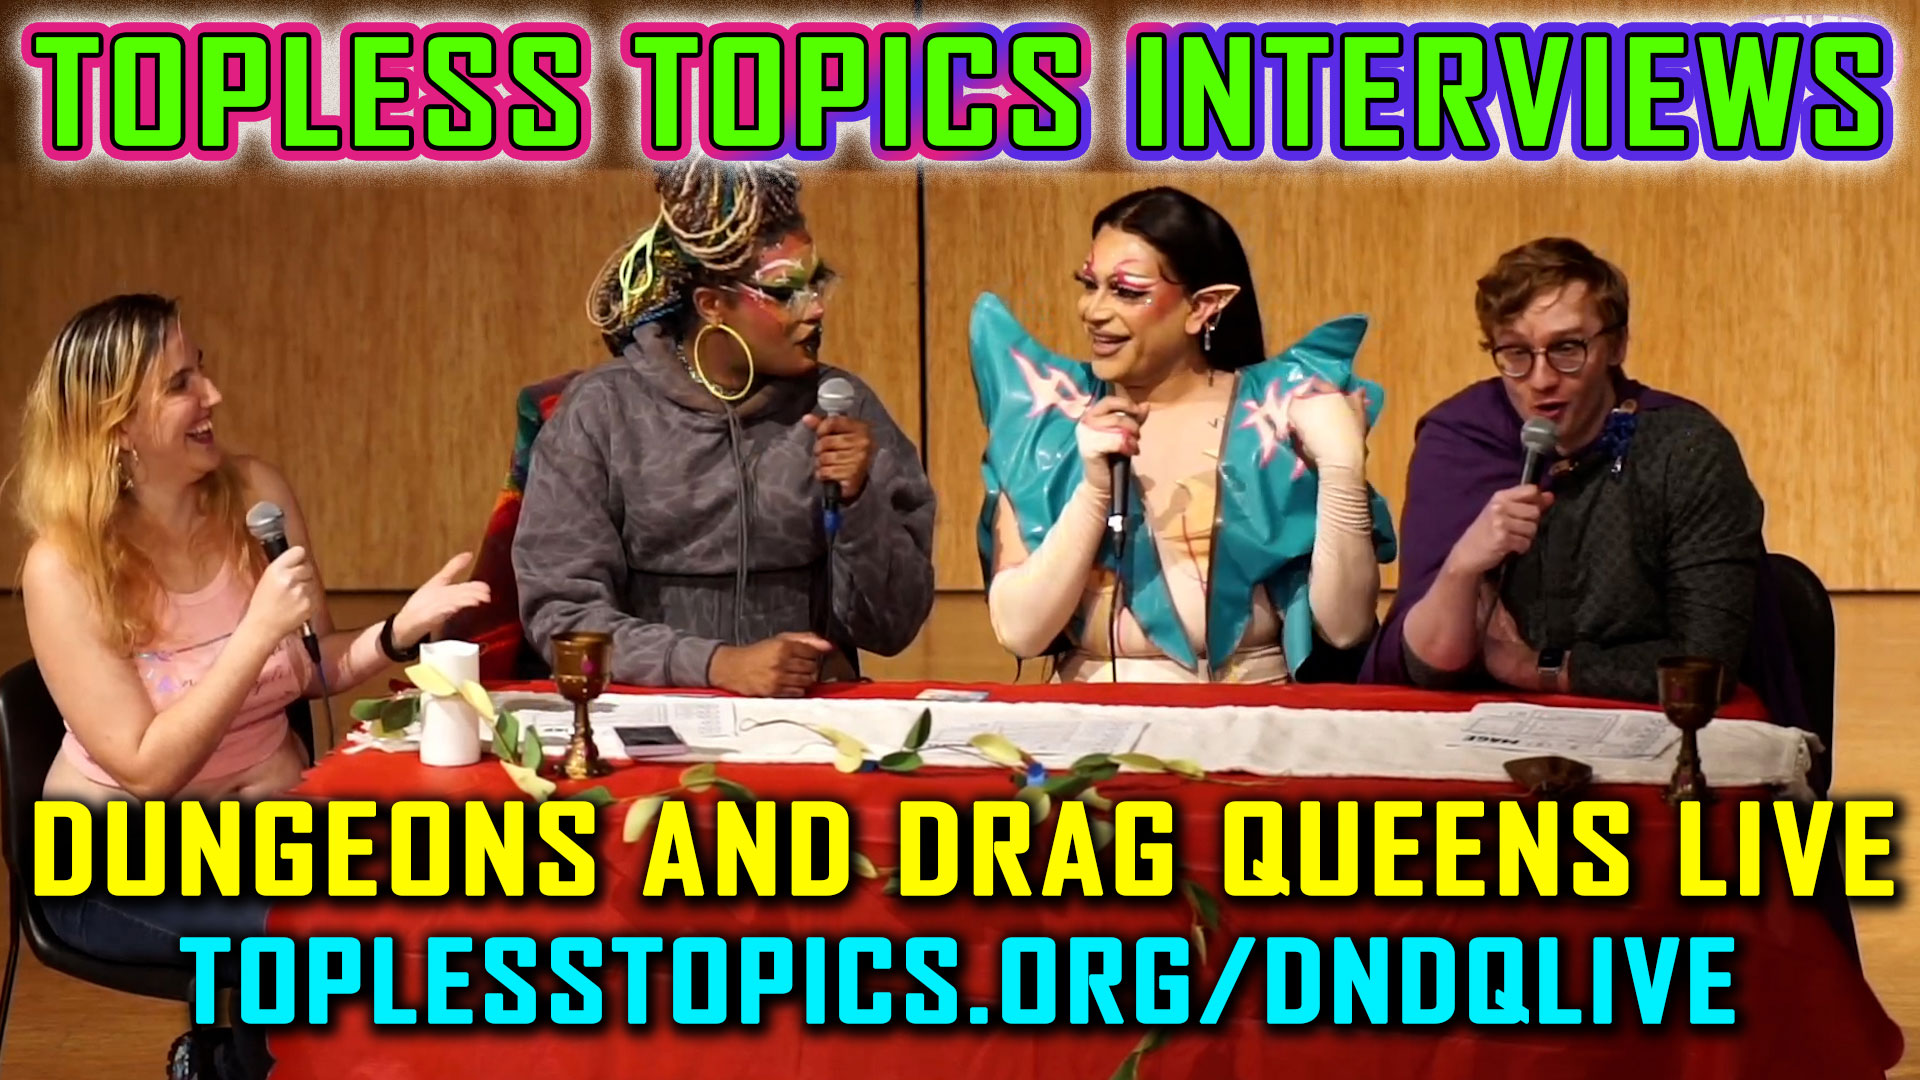 Topless Topics Interviews: Dungeons and Drag Queens Live